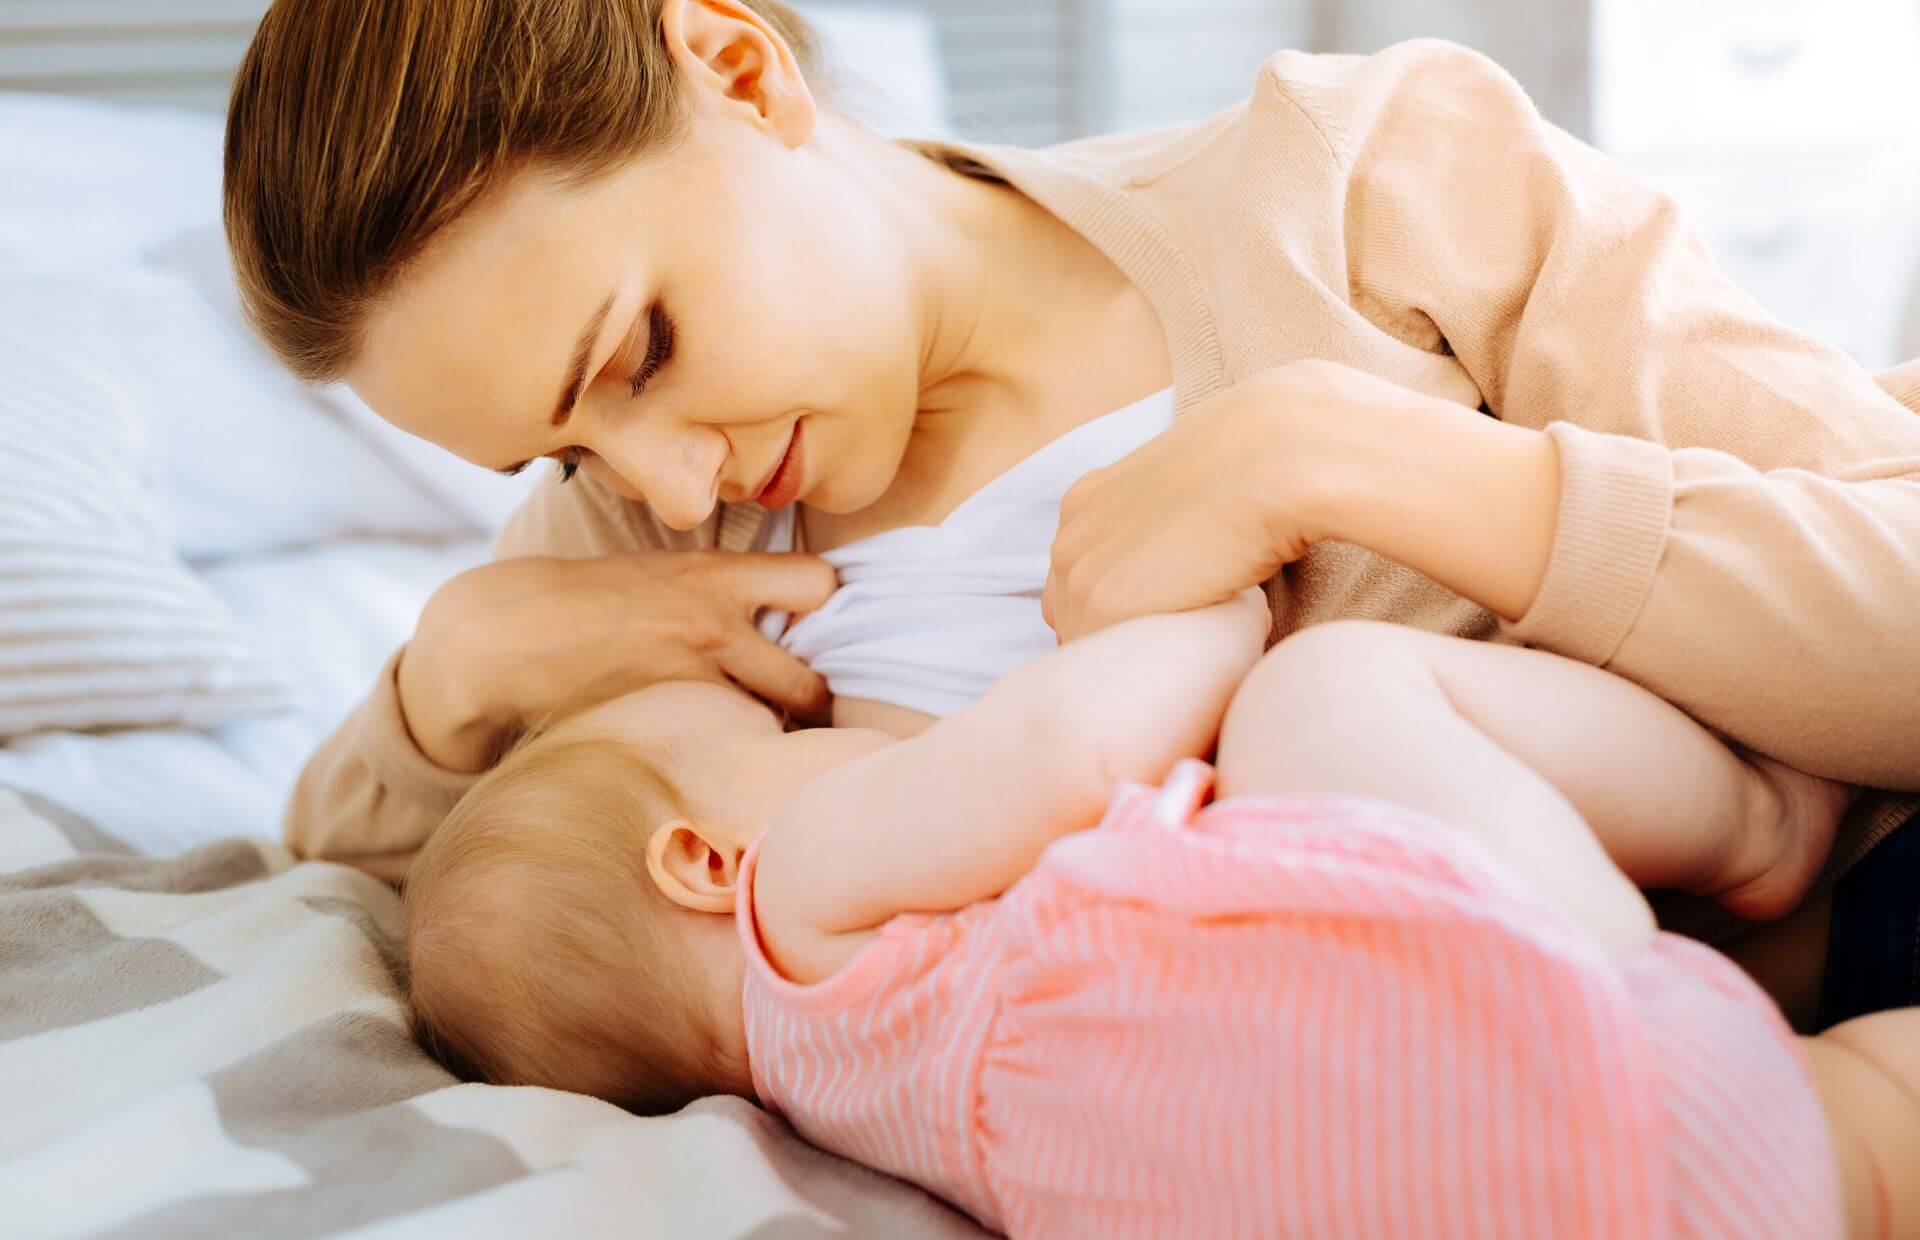 14 Best FREE Online Breastfeeding Courses For New Moms | Welcome to the Circus